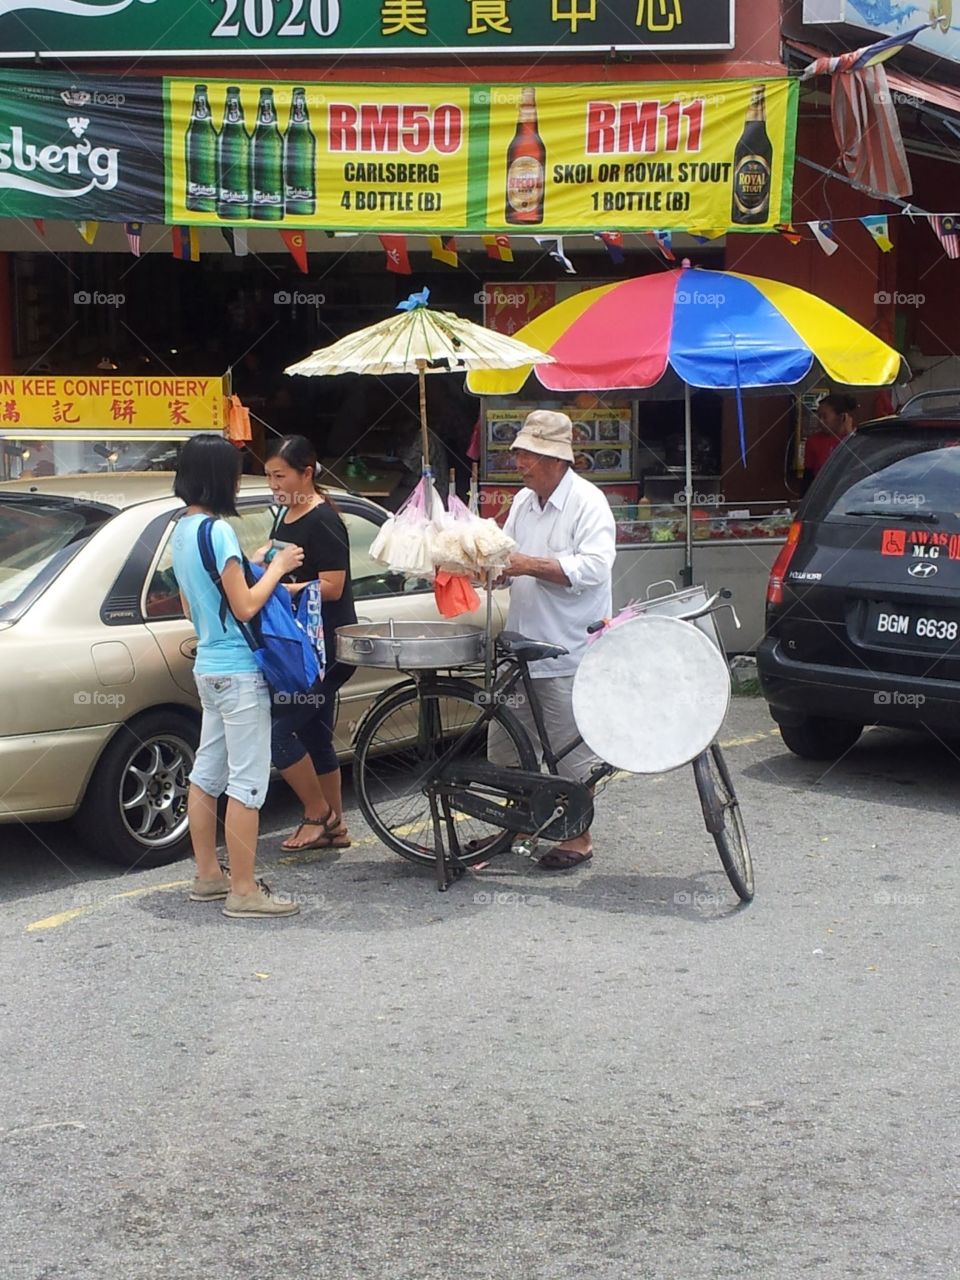 Chinese Candy seller. The last in the old tradition of Chinese candy sellers on bicycle